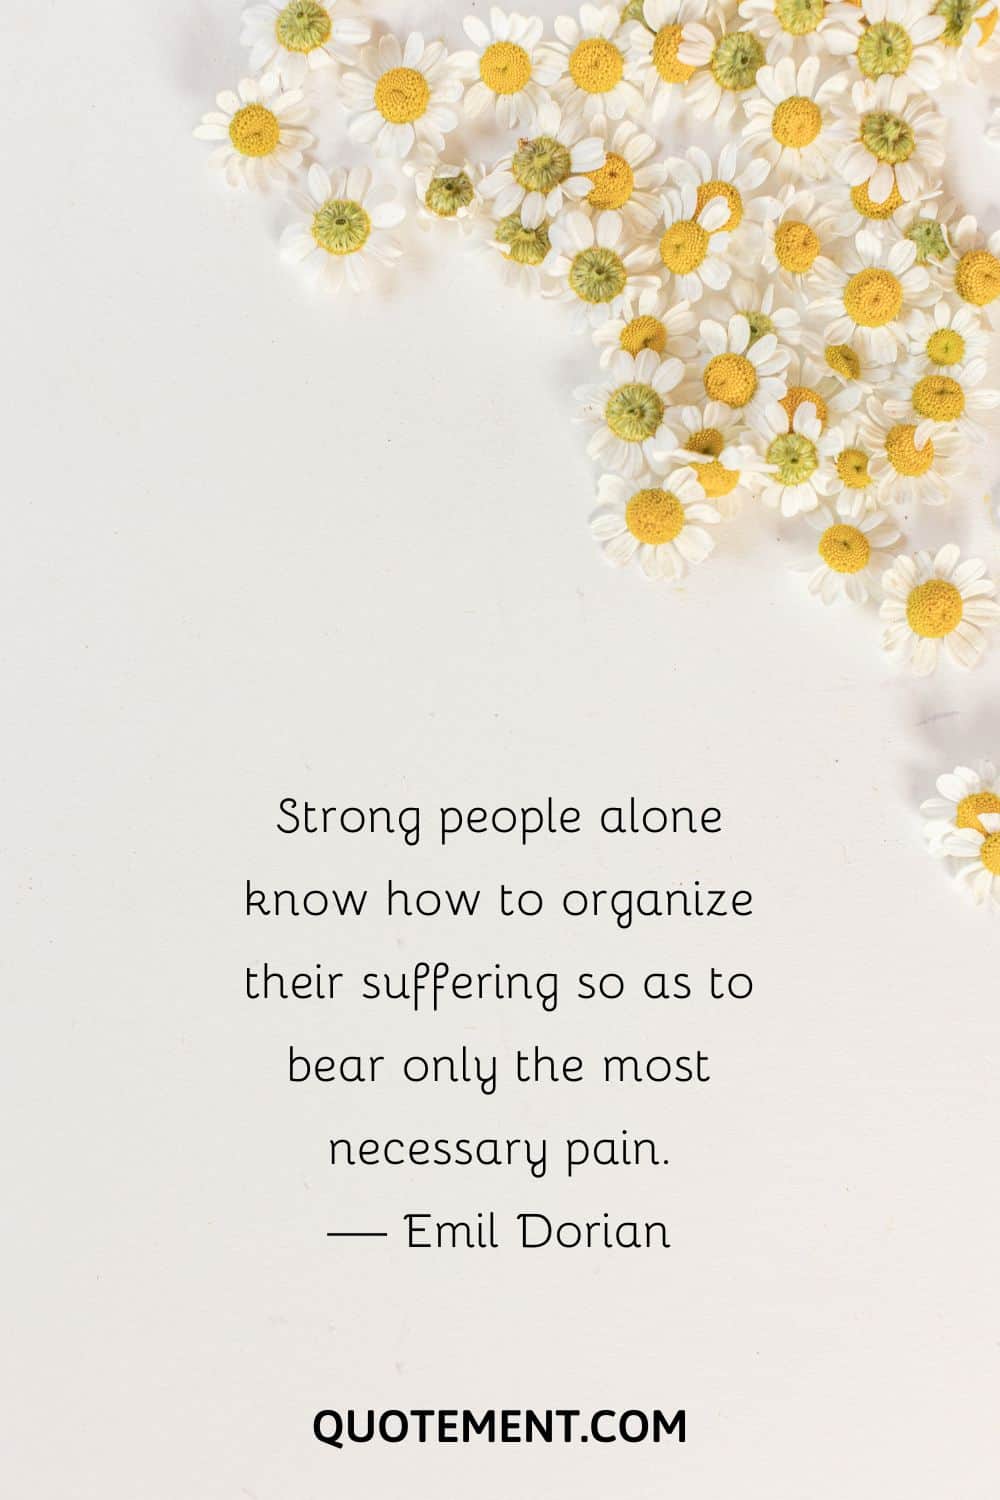 Strong people alone know how to organize their suffering so as to bear only the most necessary pain.